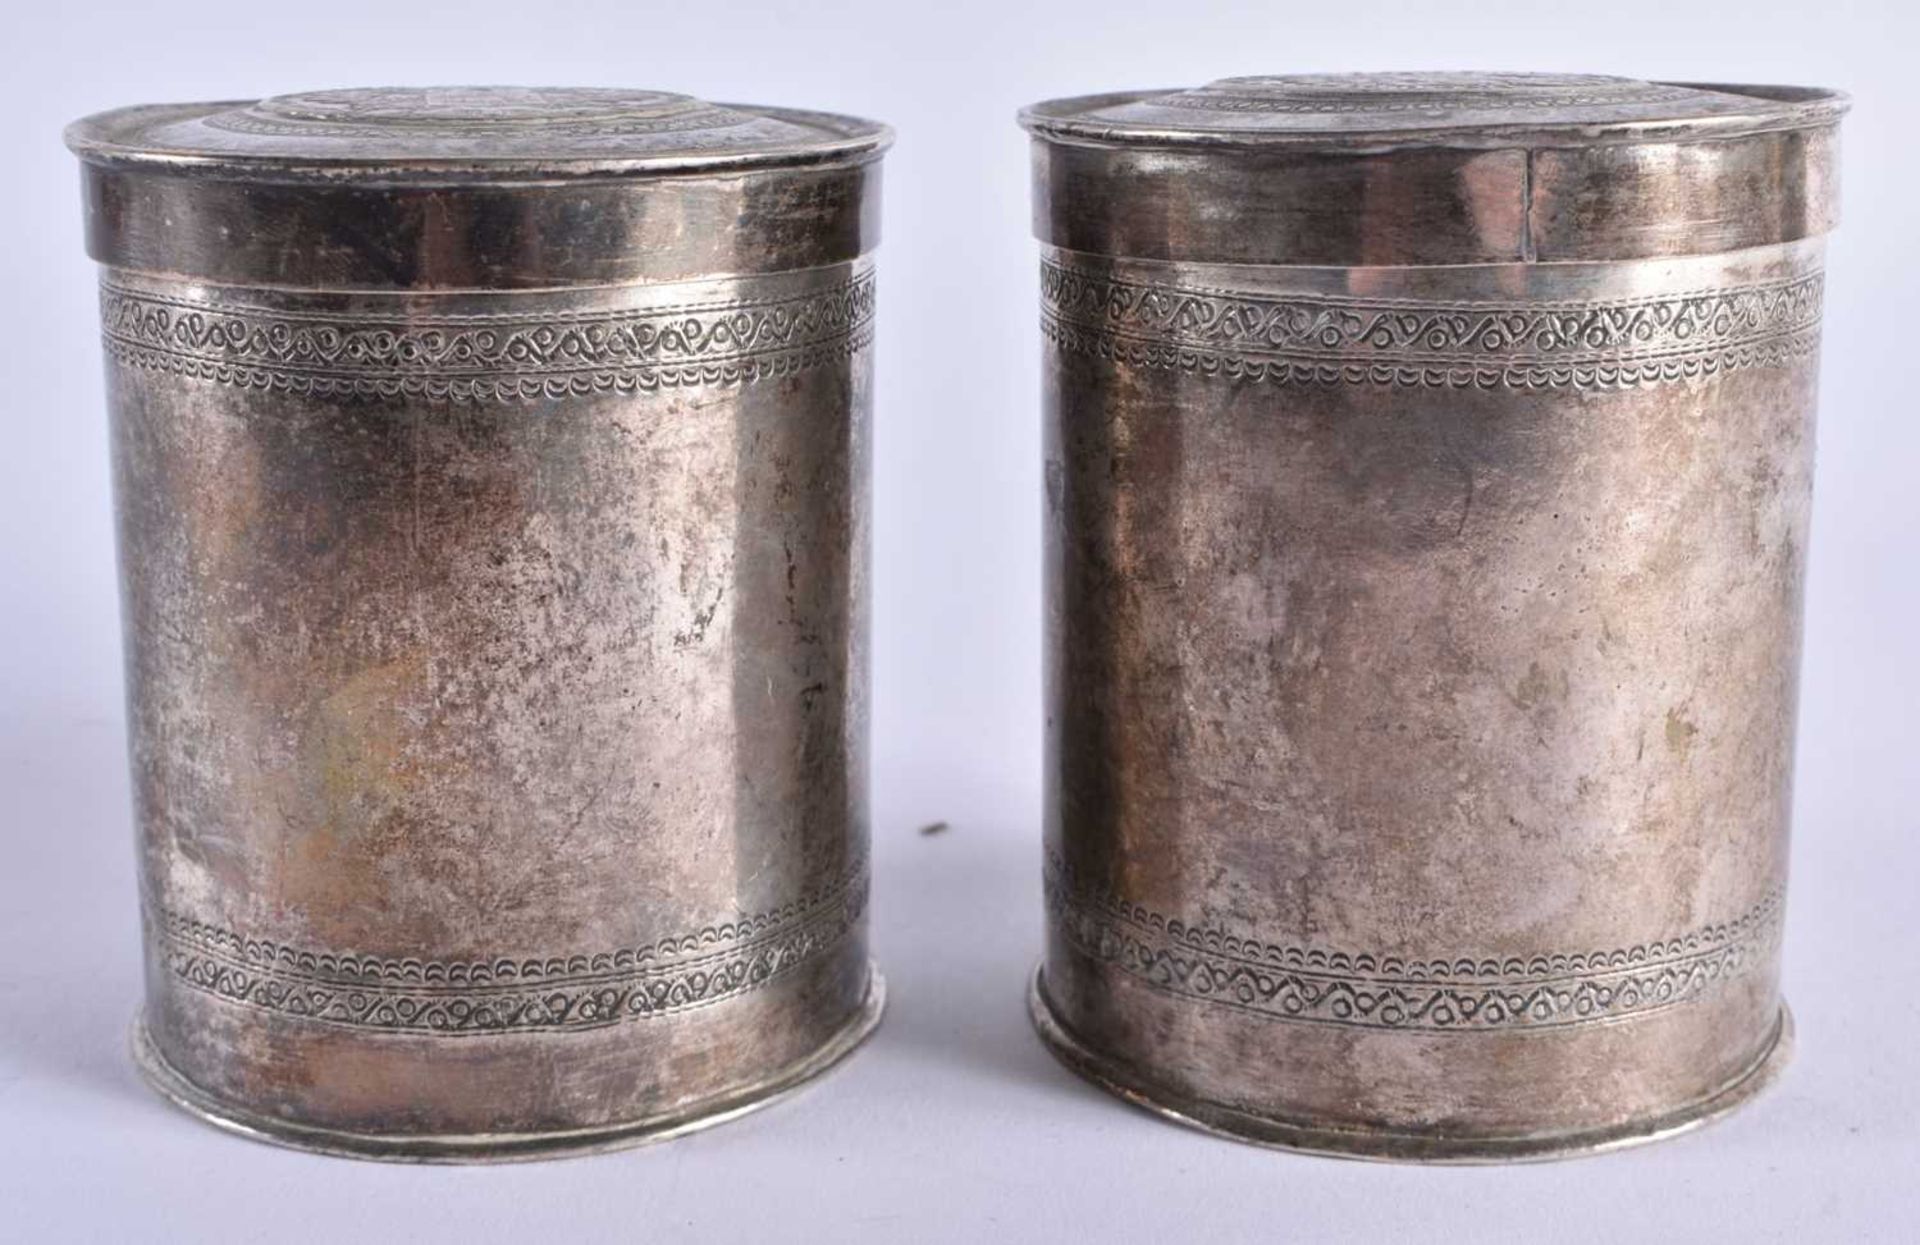 A PAIR OF ANTIQUE CONTINENTAL SILVER COIN INSET BOXES AND COVERS. 344 grams. 9 cm x 7.25 cm.